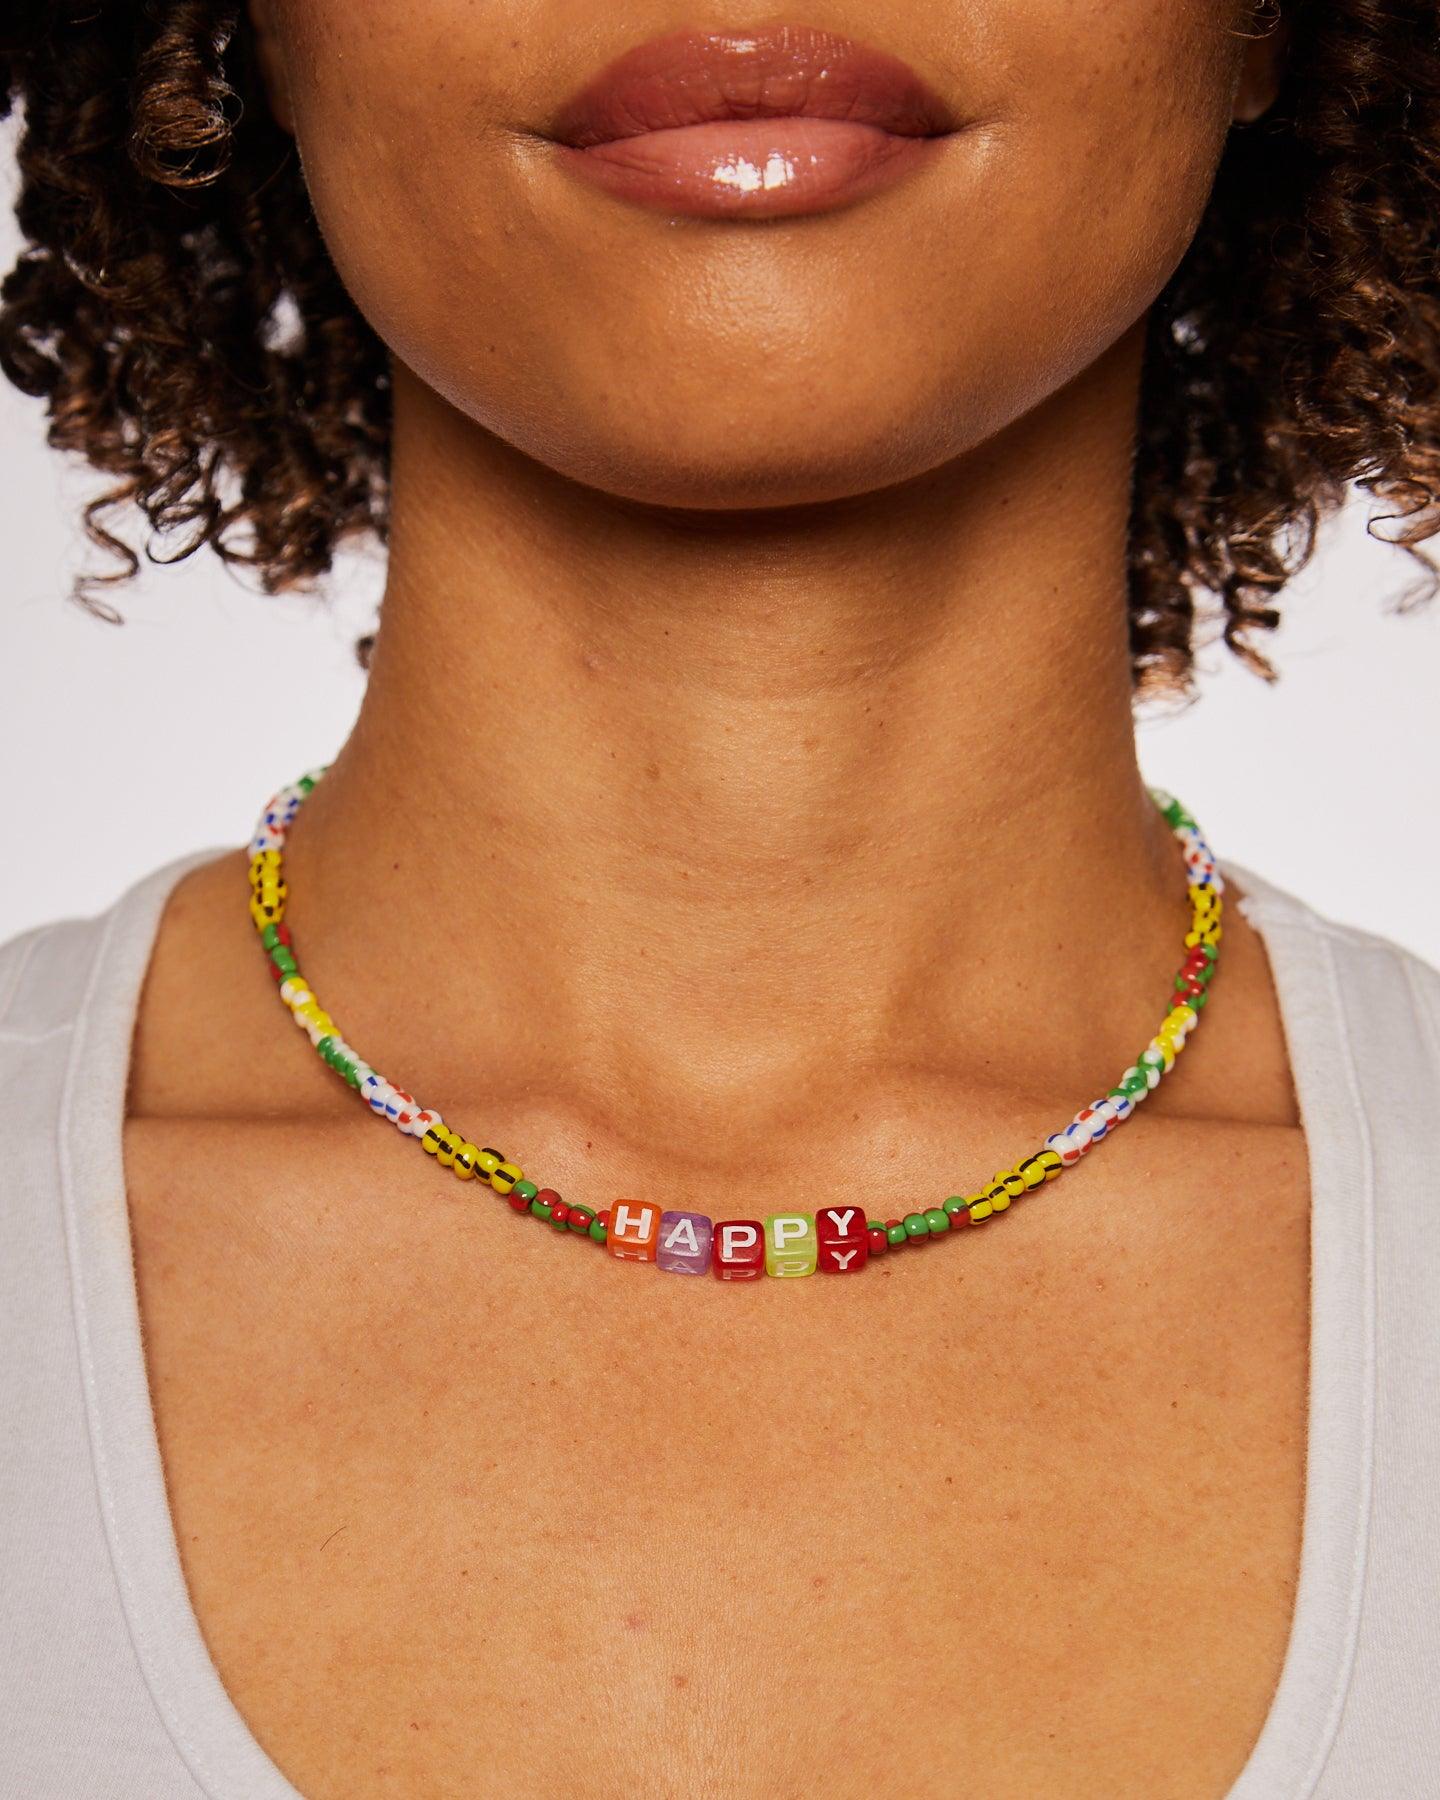 HAPPY BEADS NECKLACE - 8 Other Reasons